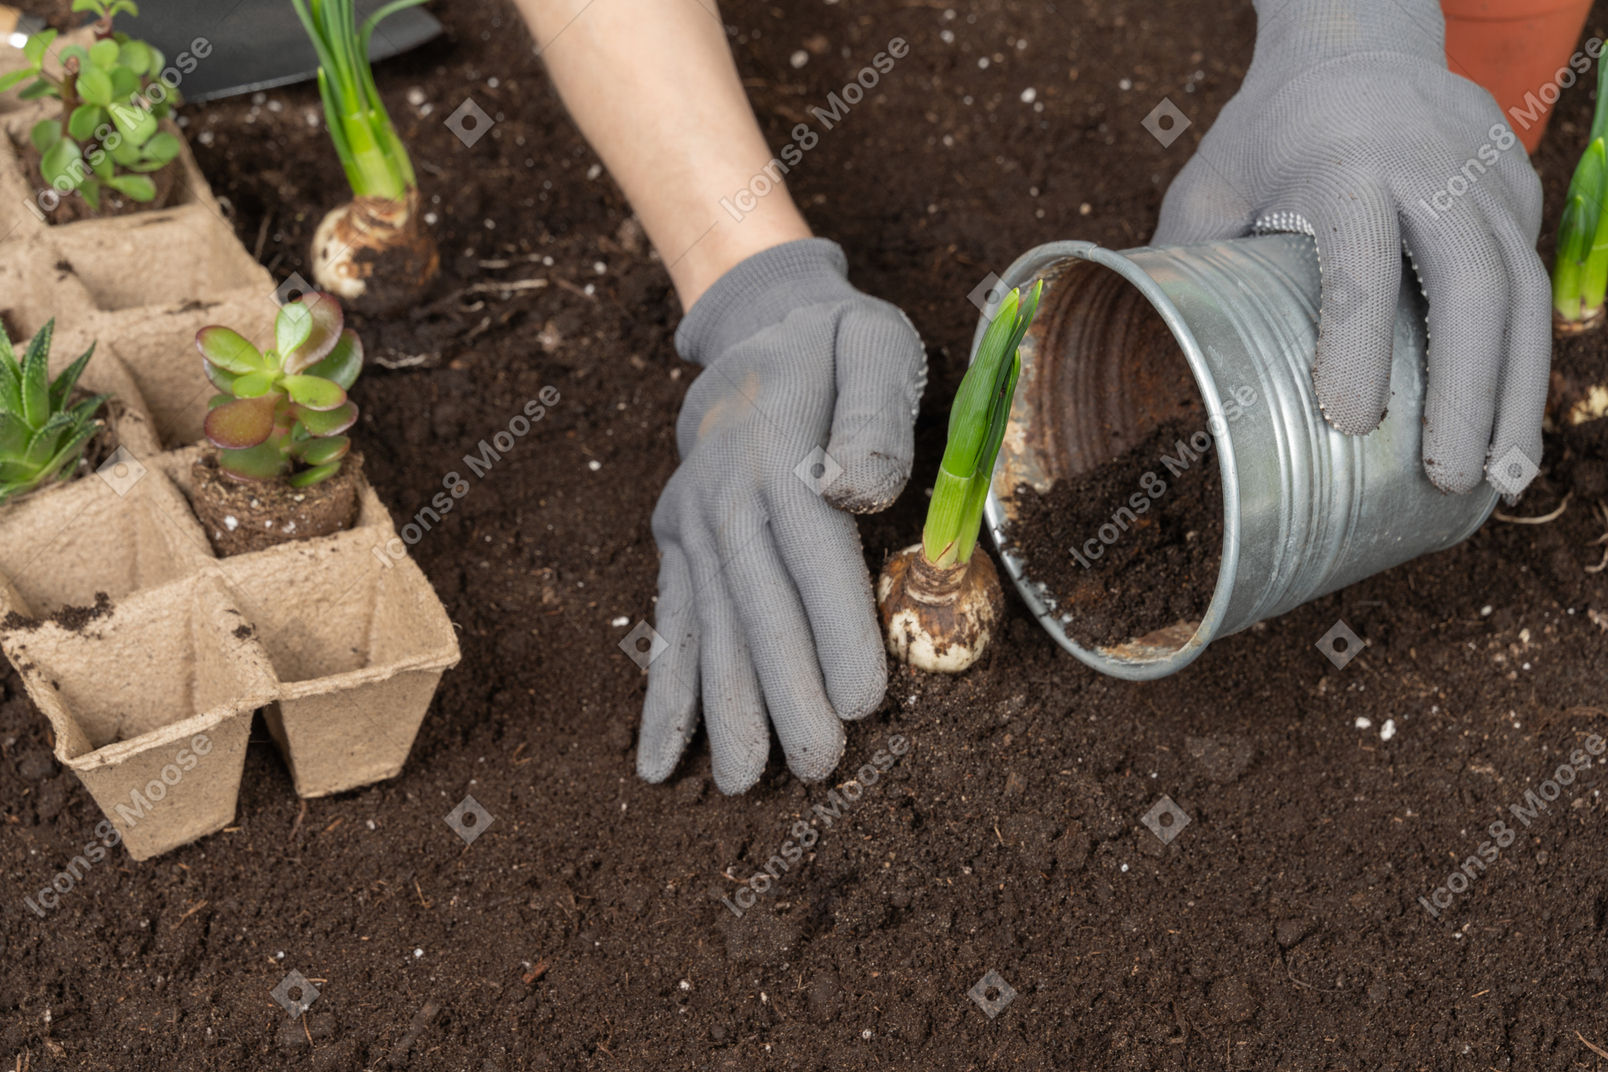 Human hands in gloves putting a plant into soil